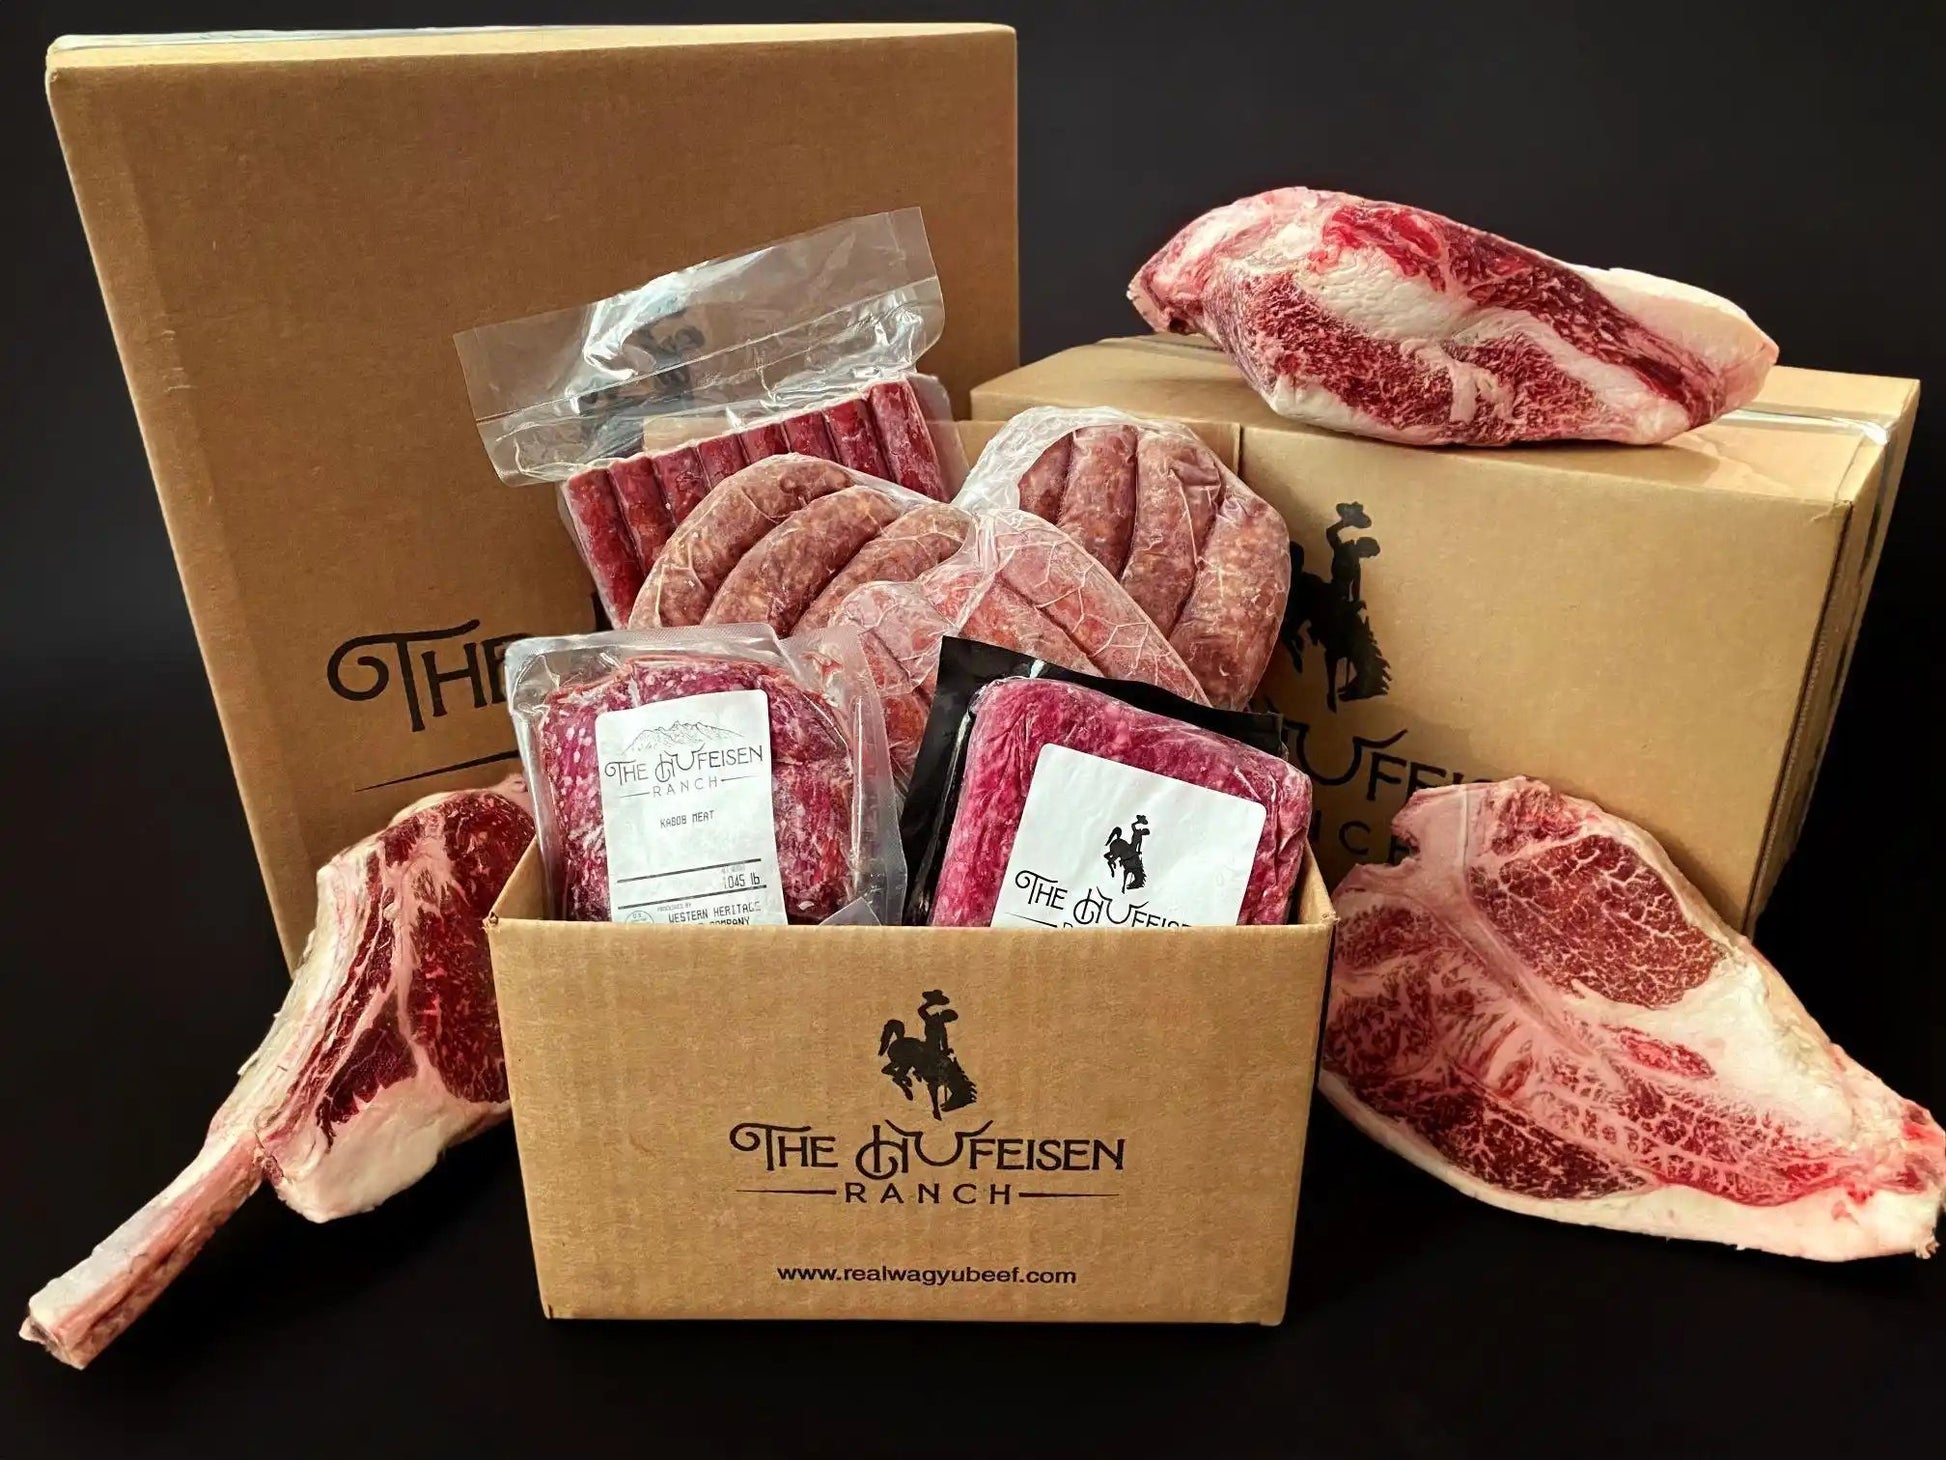 Grass-Fed Pasture-Raised Wagyu or Angus 1/16th Beef Share Box - 25lbs The Grass-Fed 1/16th Beef Box is a gourmet selection of exceptional Wagyu or Angus beef cuts, offering a taste of luxury and indulgence. This carefully curated box cGrass-Fed Pasture-Raised WagyuThe Hufeisen-Ranch (WYO Wagyu)